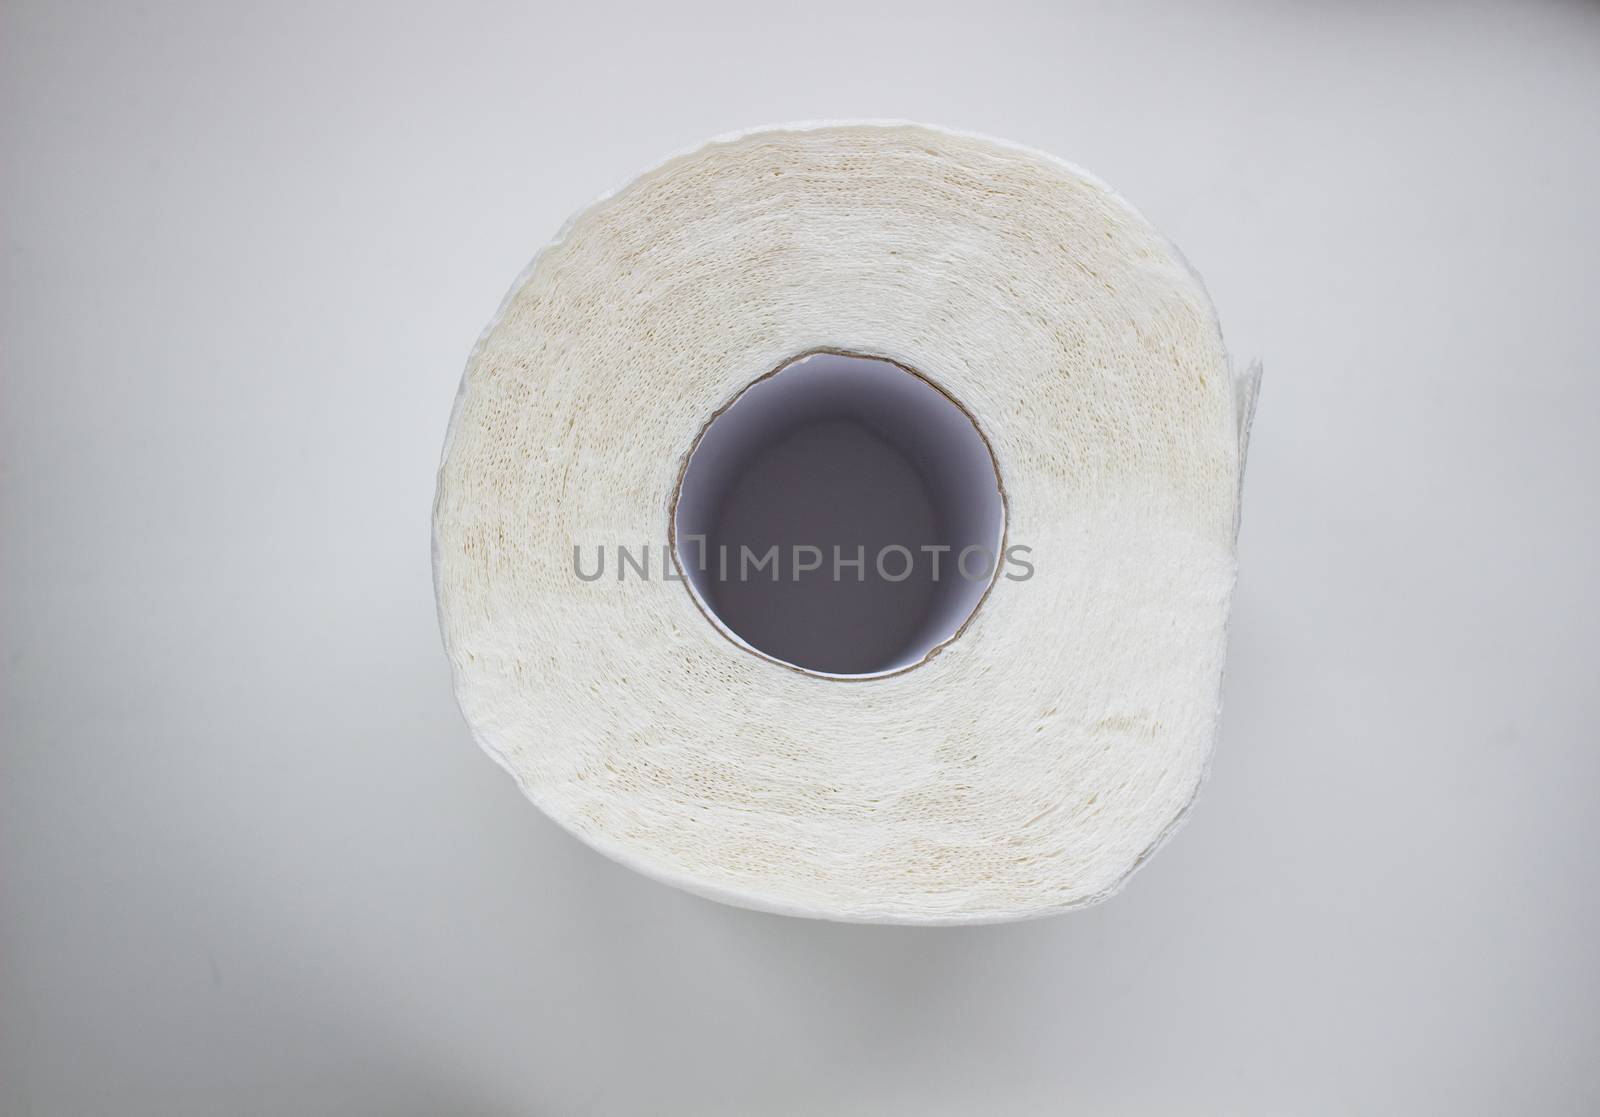 A roll of toilet paper on white background.